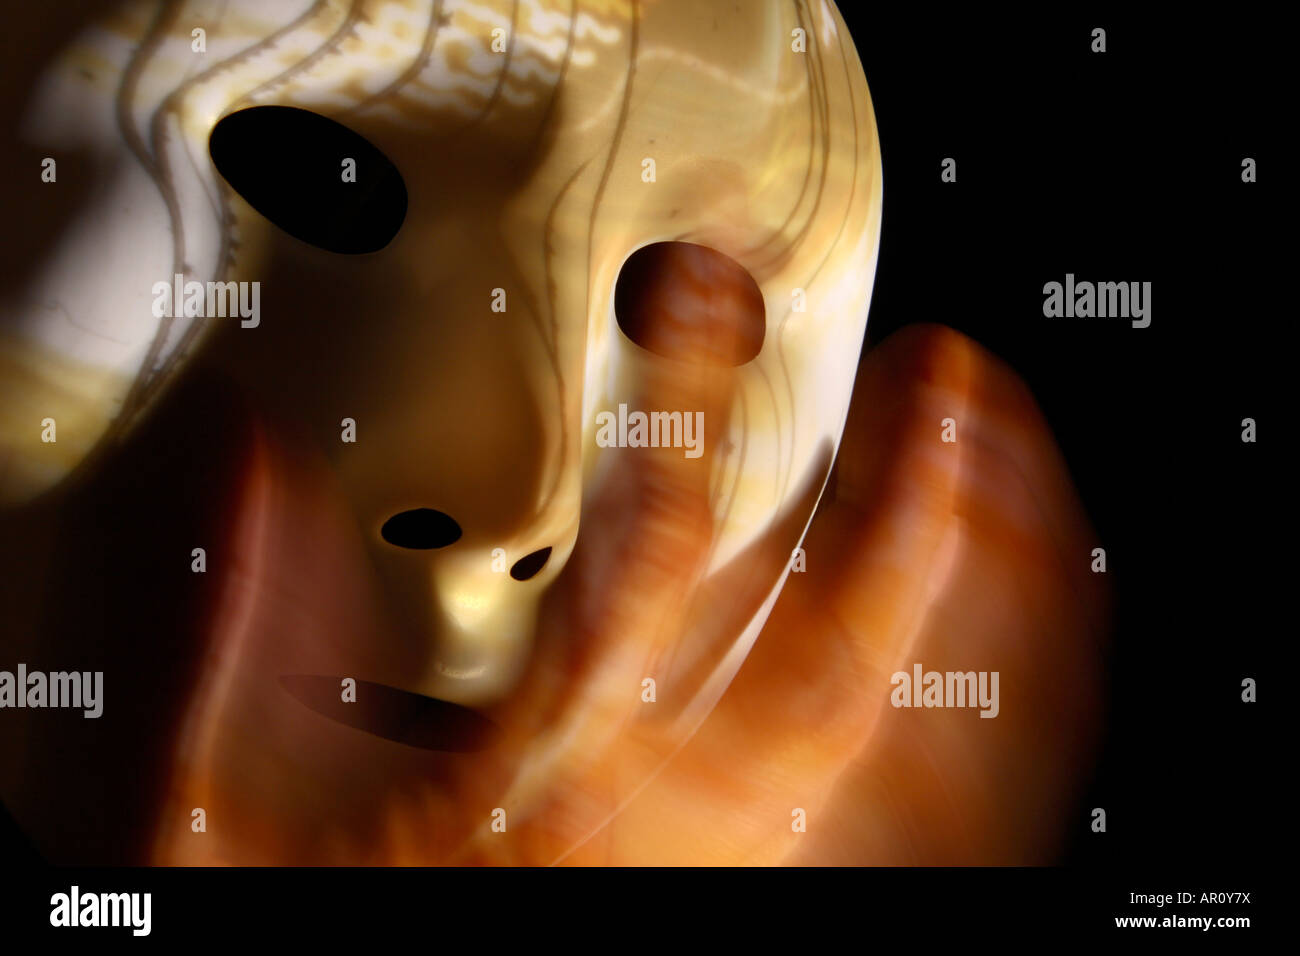 Alien Face and hand. Stock Photo